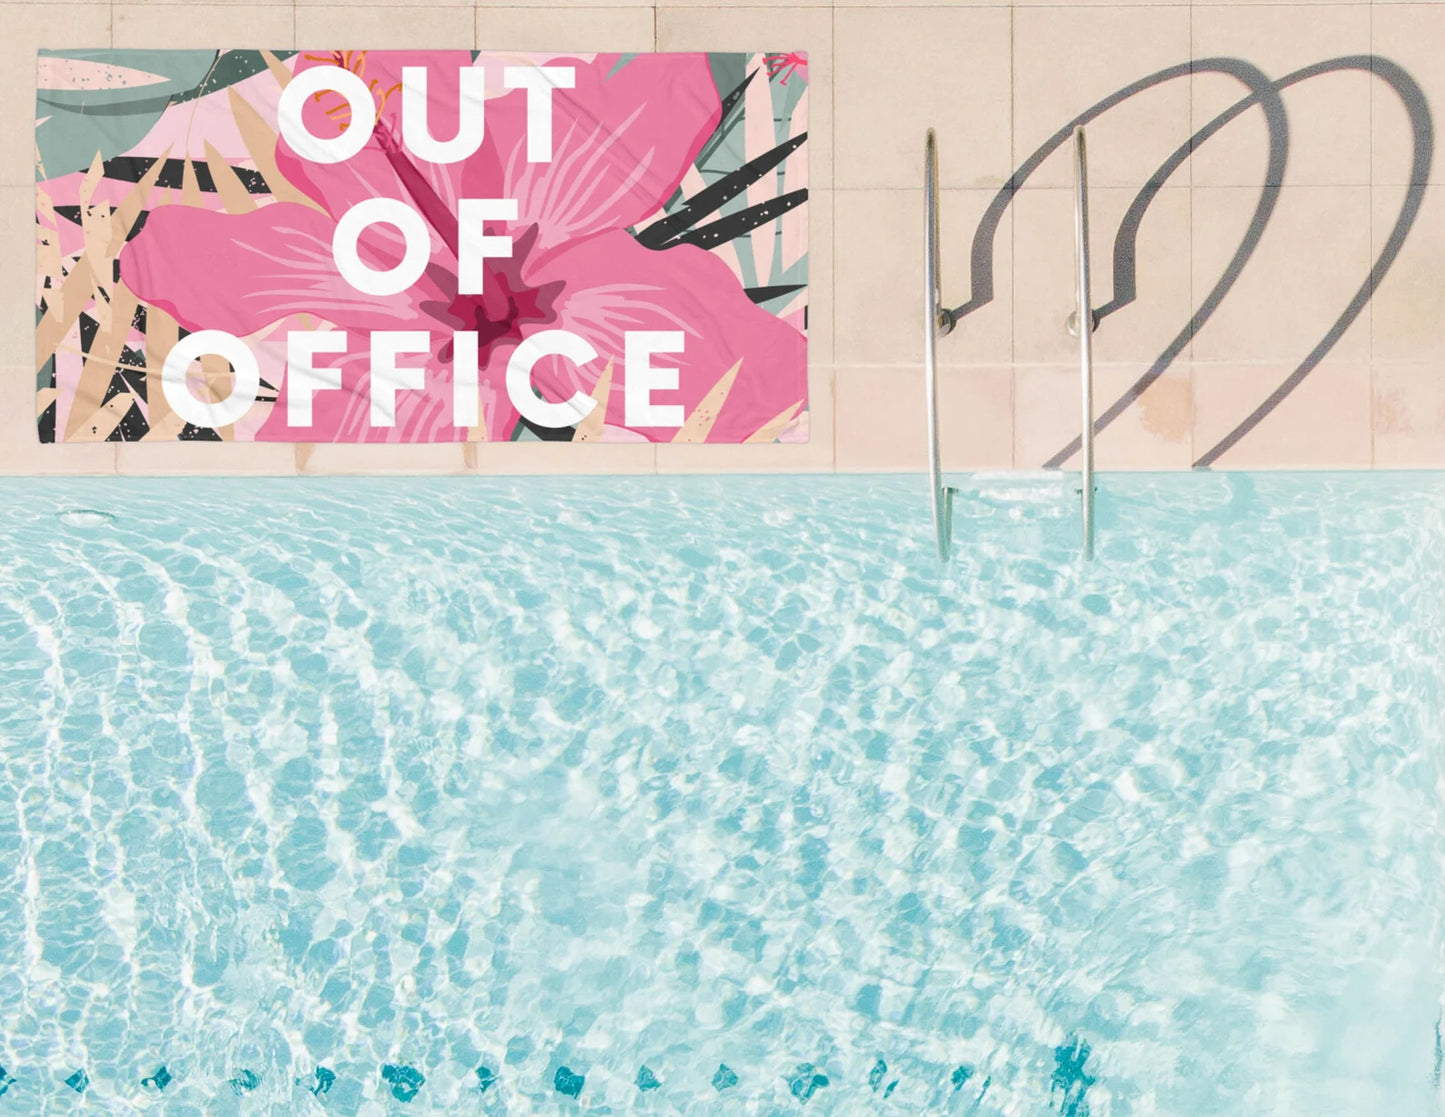 Out of Office Towel